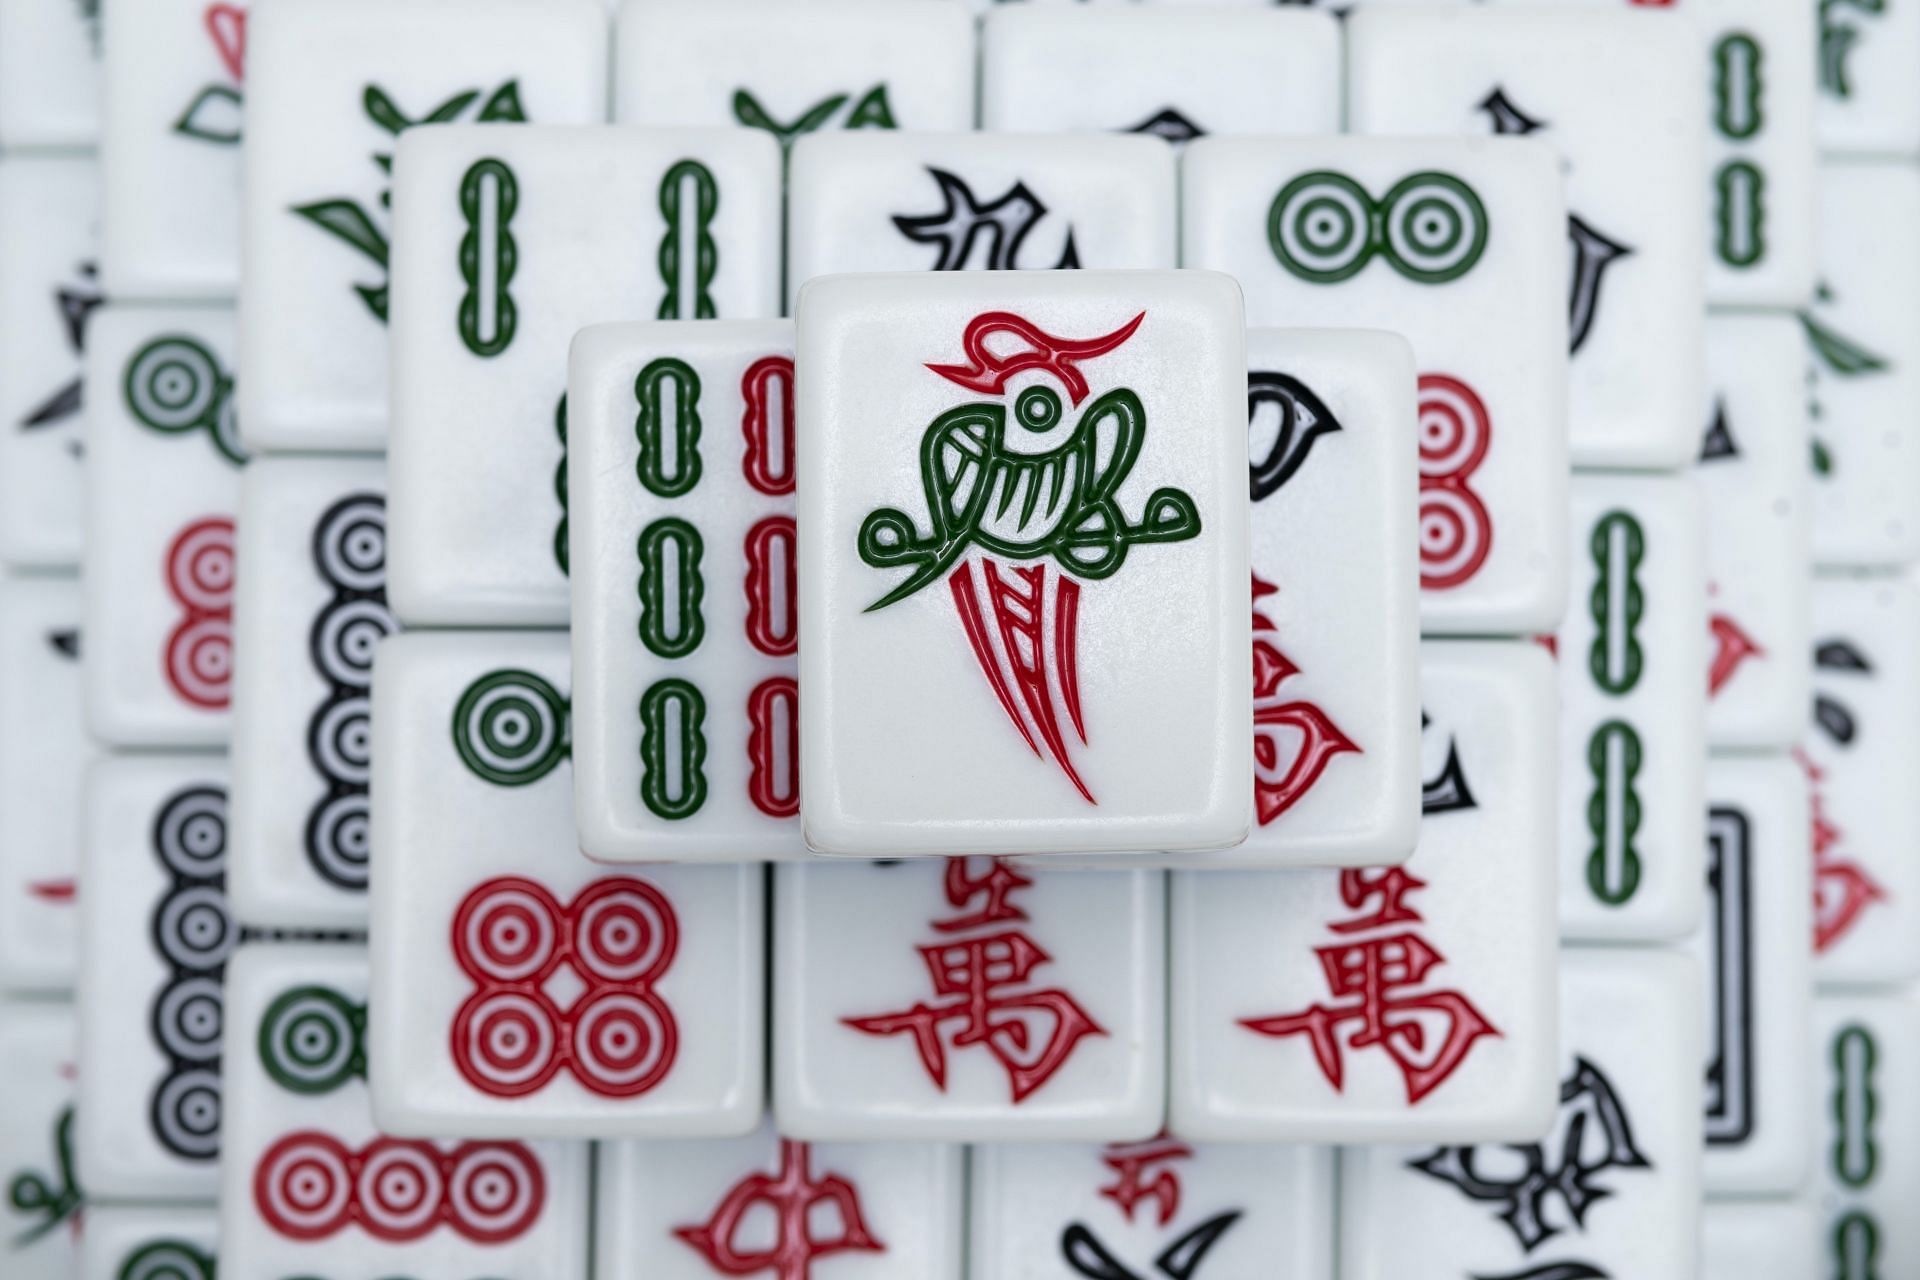 How a popular PC gaming hit was influenced by the ancient game of mahjong